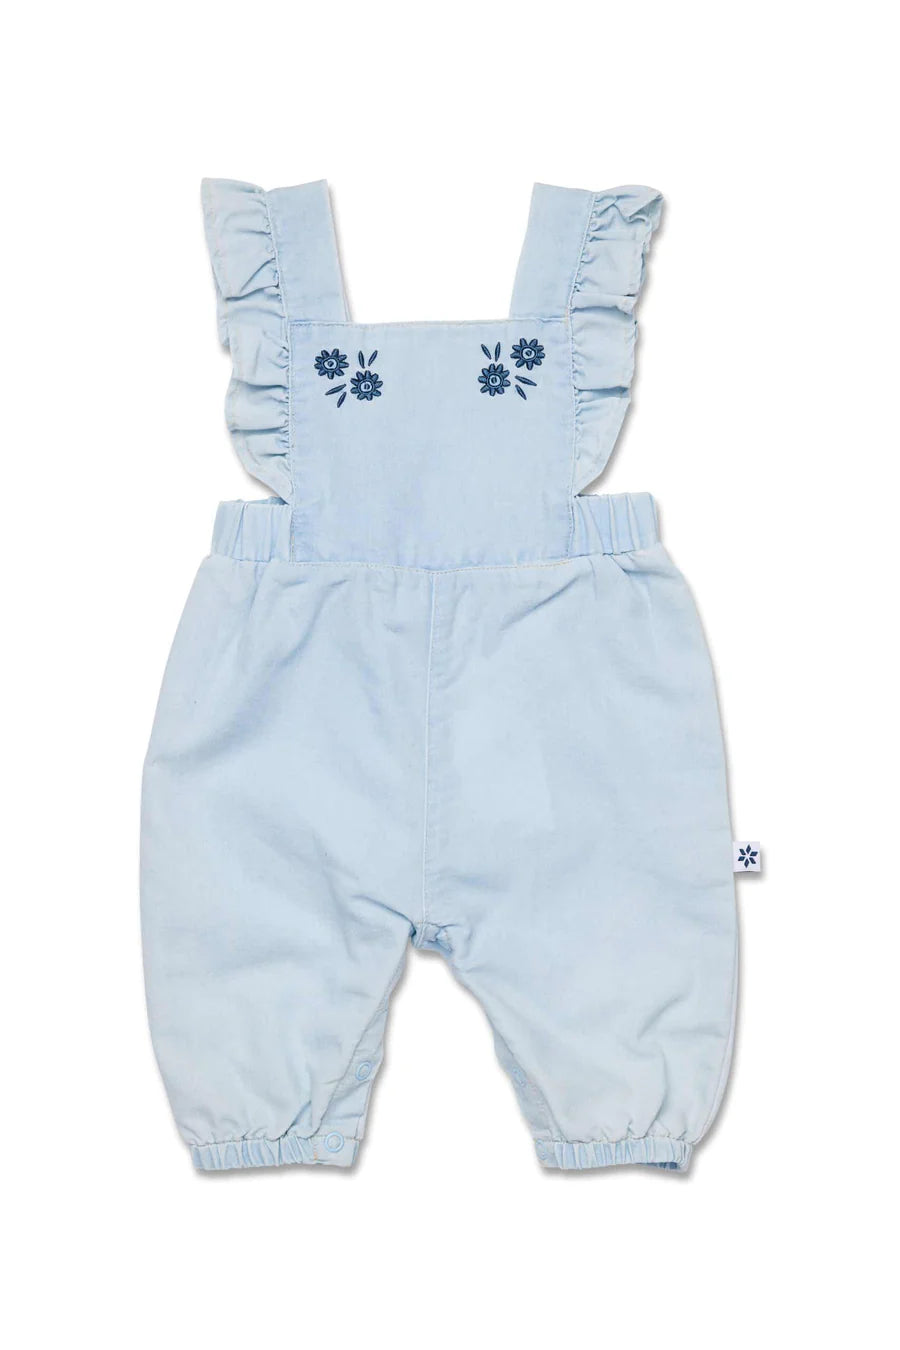 Marquise Mediterranean Dreaming Chambray Romper - Chambray